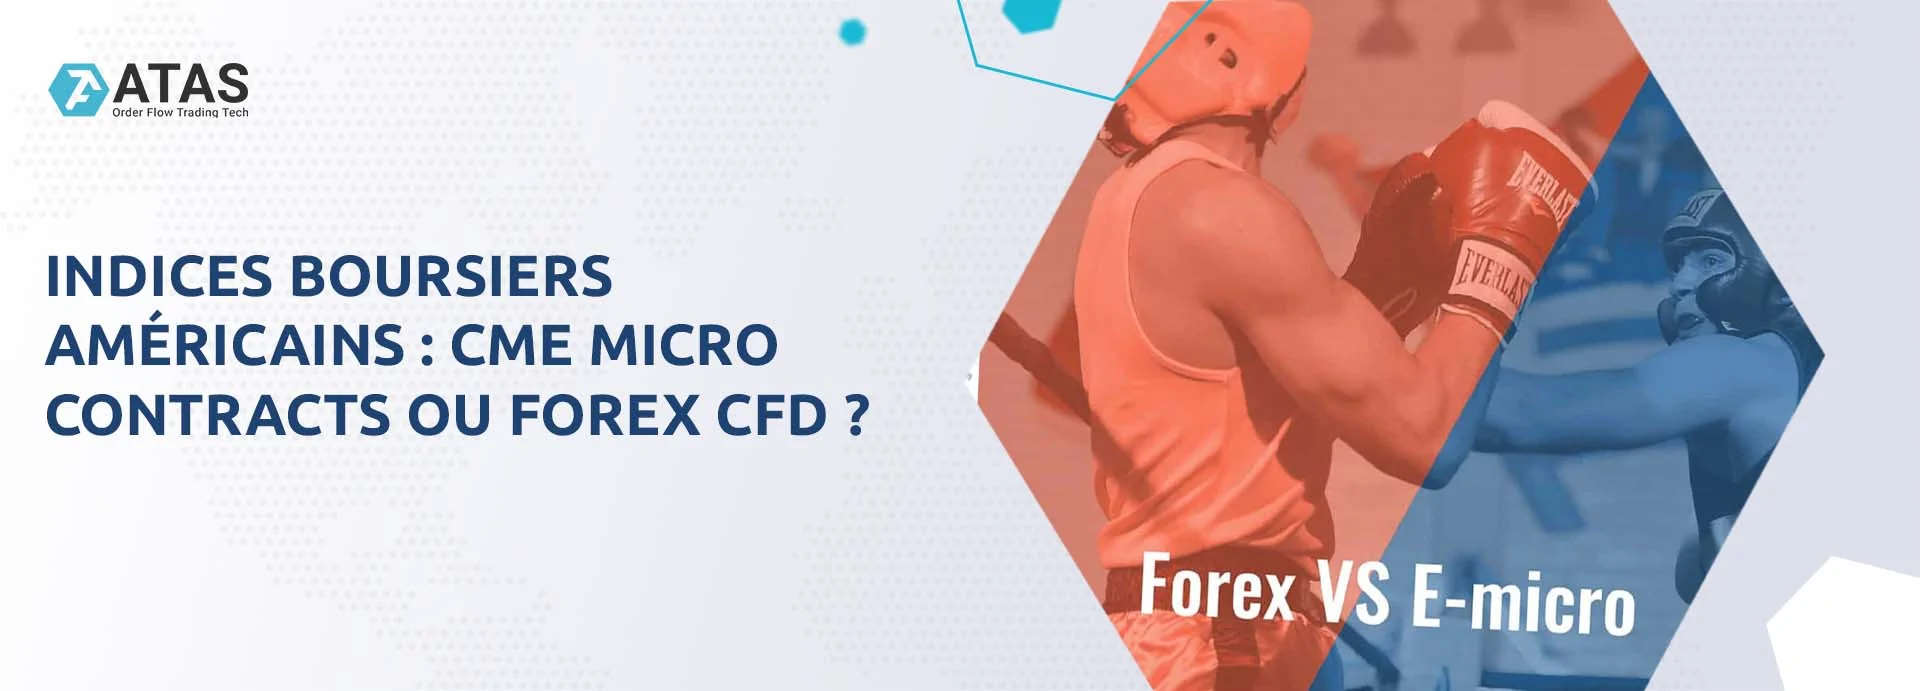 Indices boursiers américains : CME Micro Contracts ou Forex CFD ?